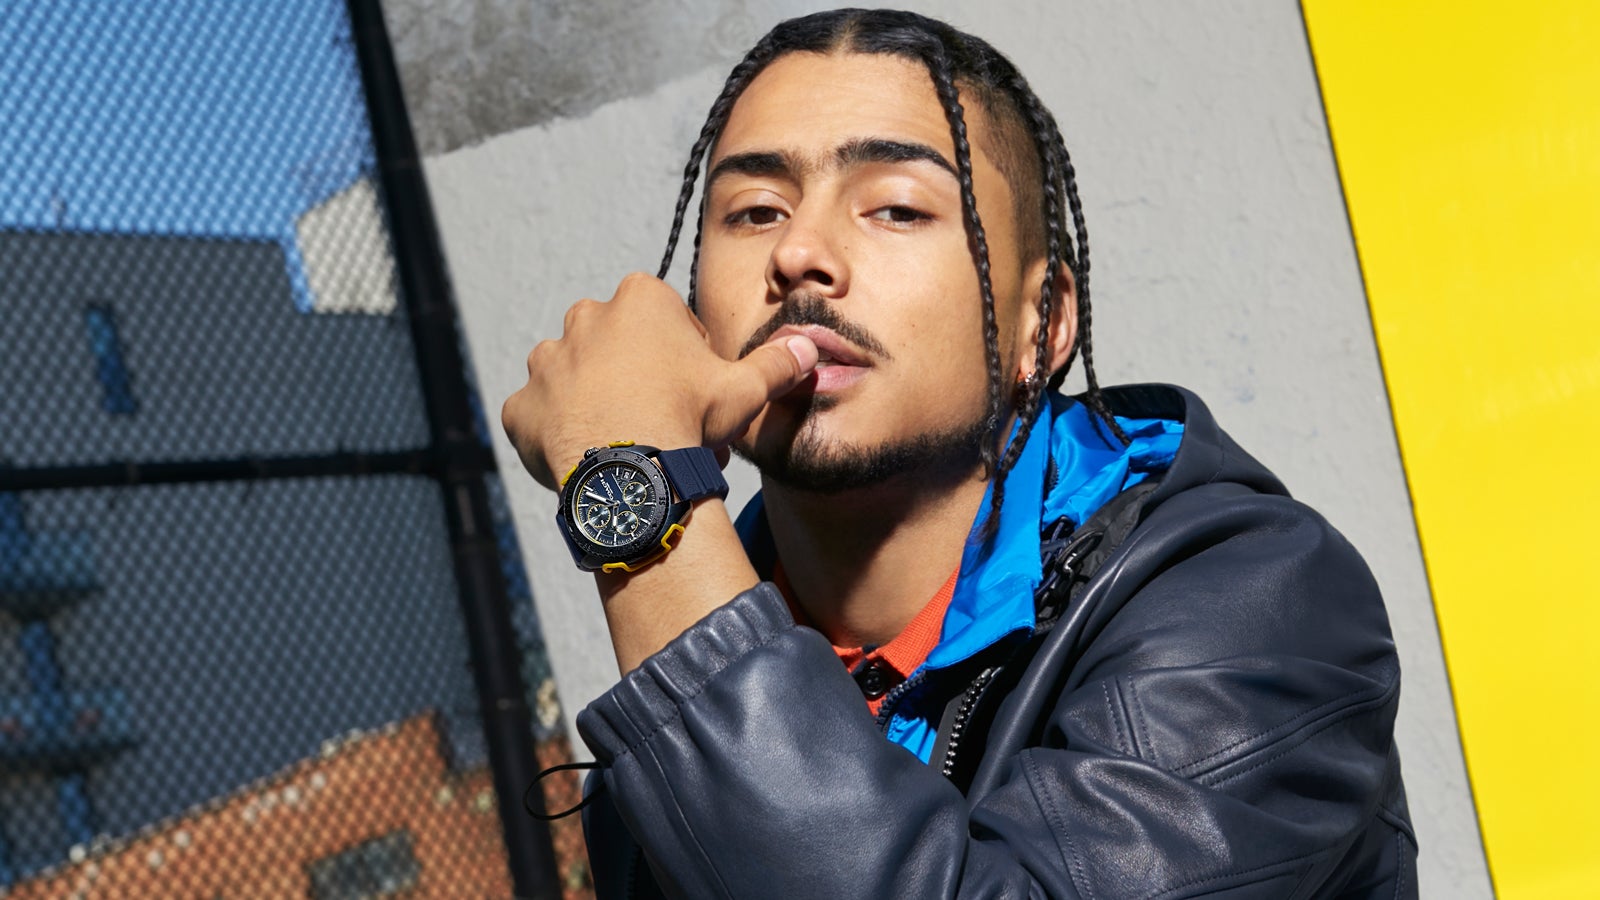 Coach And Quincy Launch Versatile Timepiece Collection For Those Who Love Options